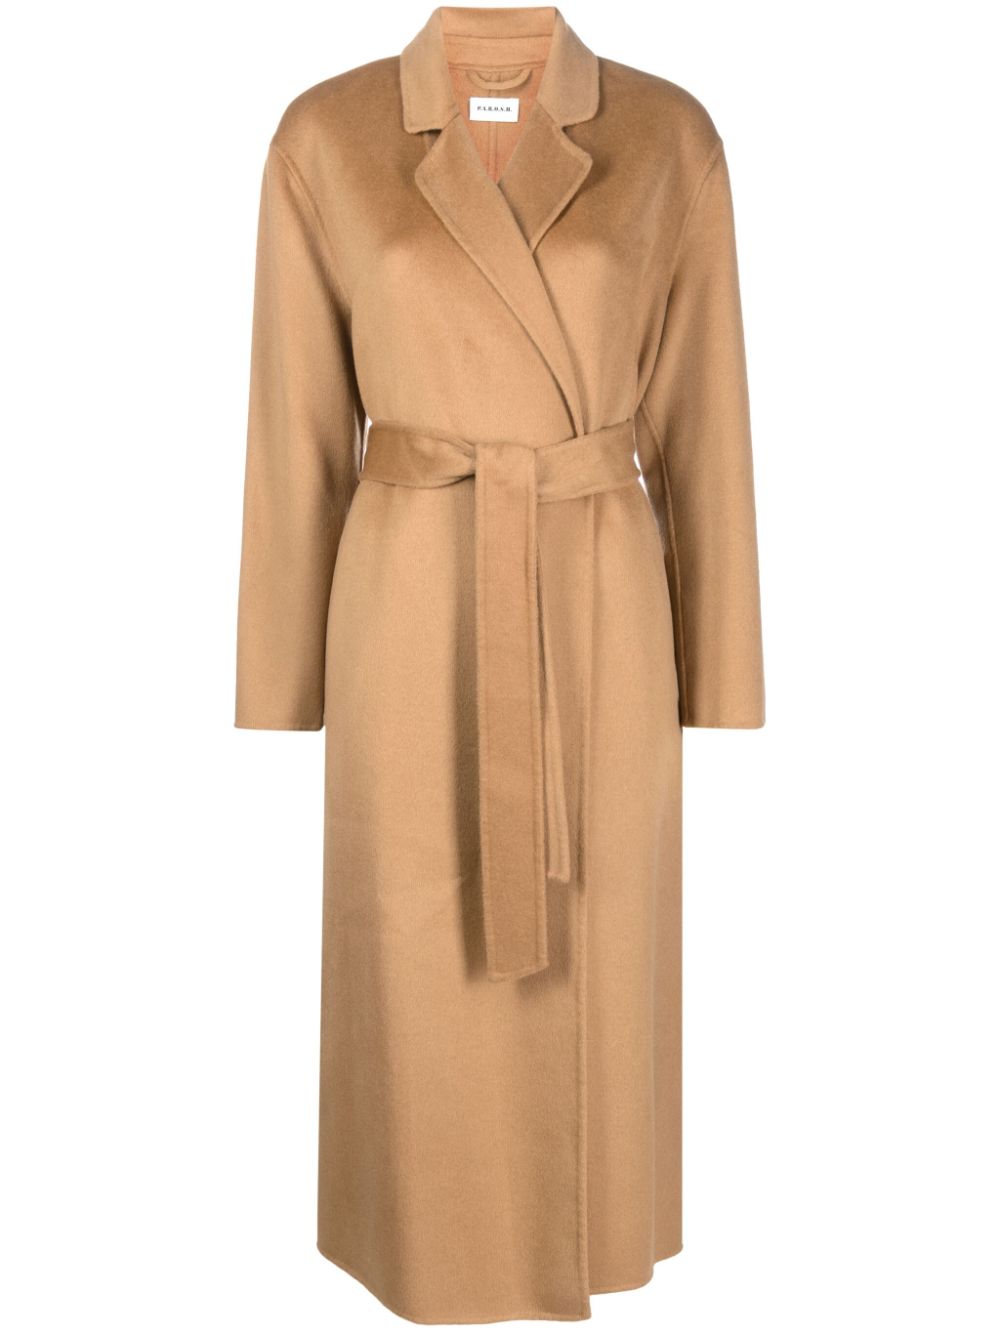 P.A.R.O.S.H BELTED-WAIST CASHMERE PEACOAT